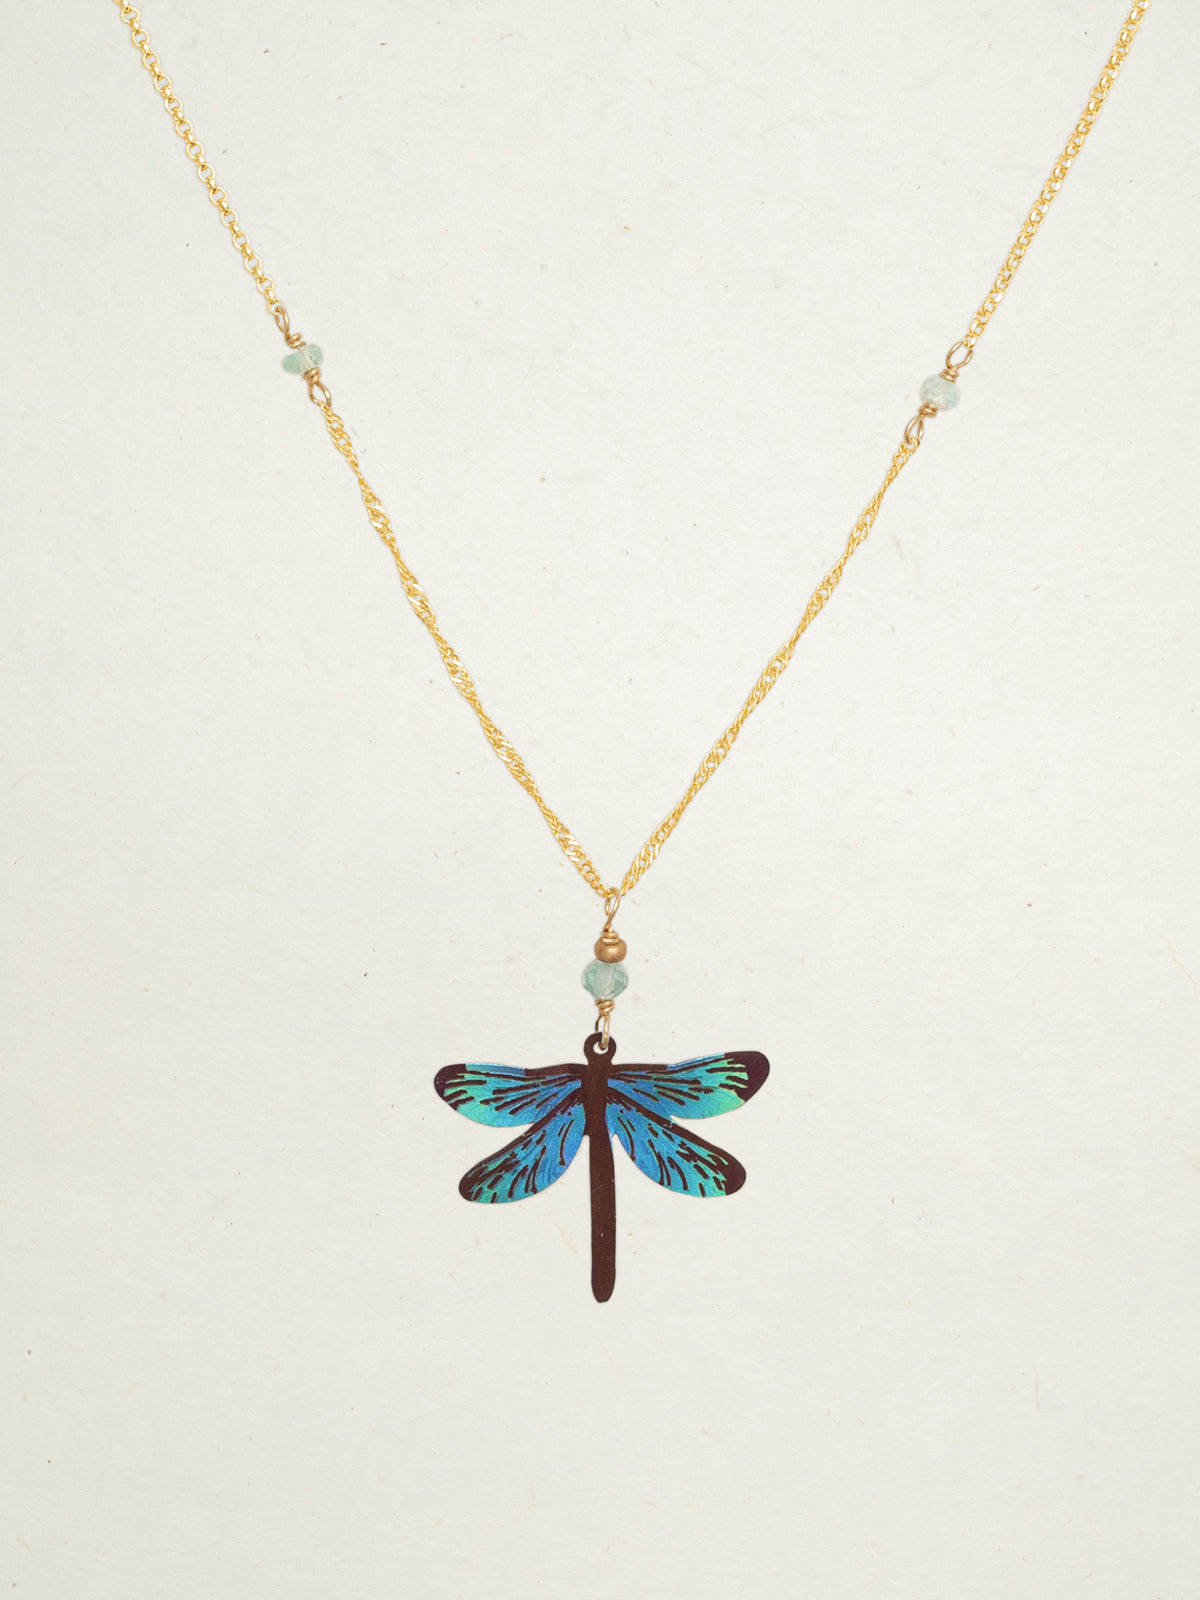 Turquoise Dragonfly Dreams Pendant Necklace